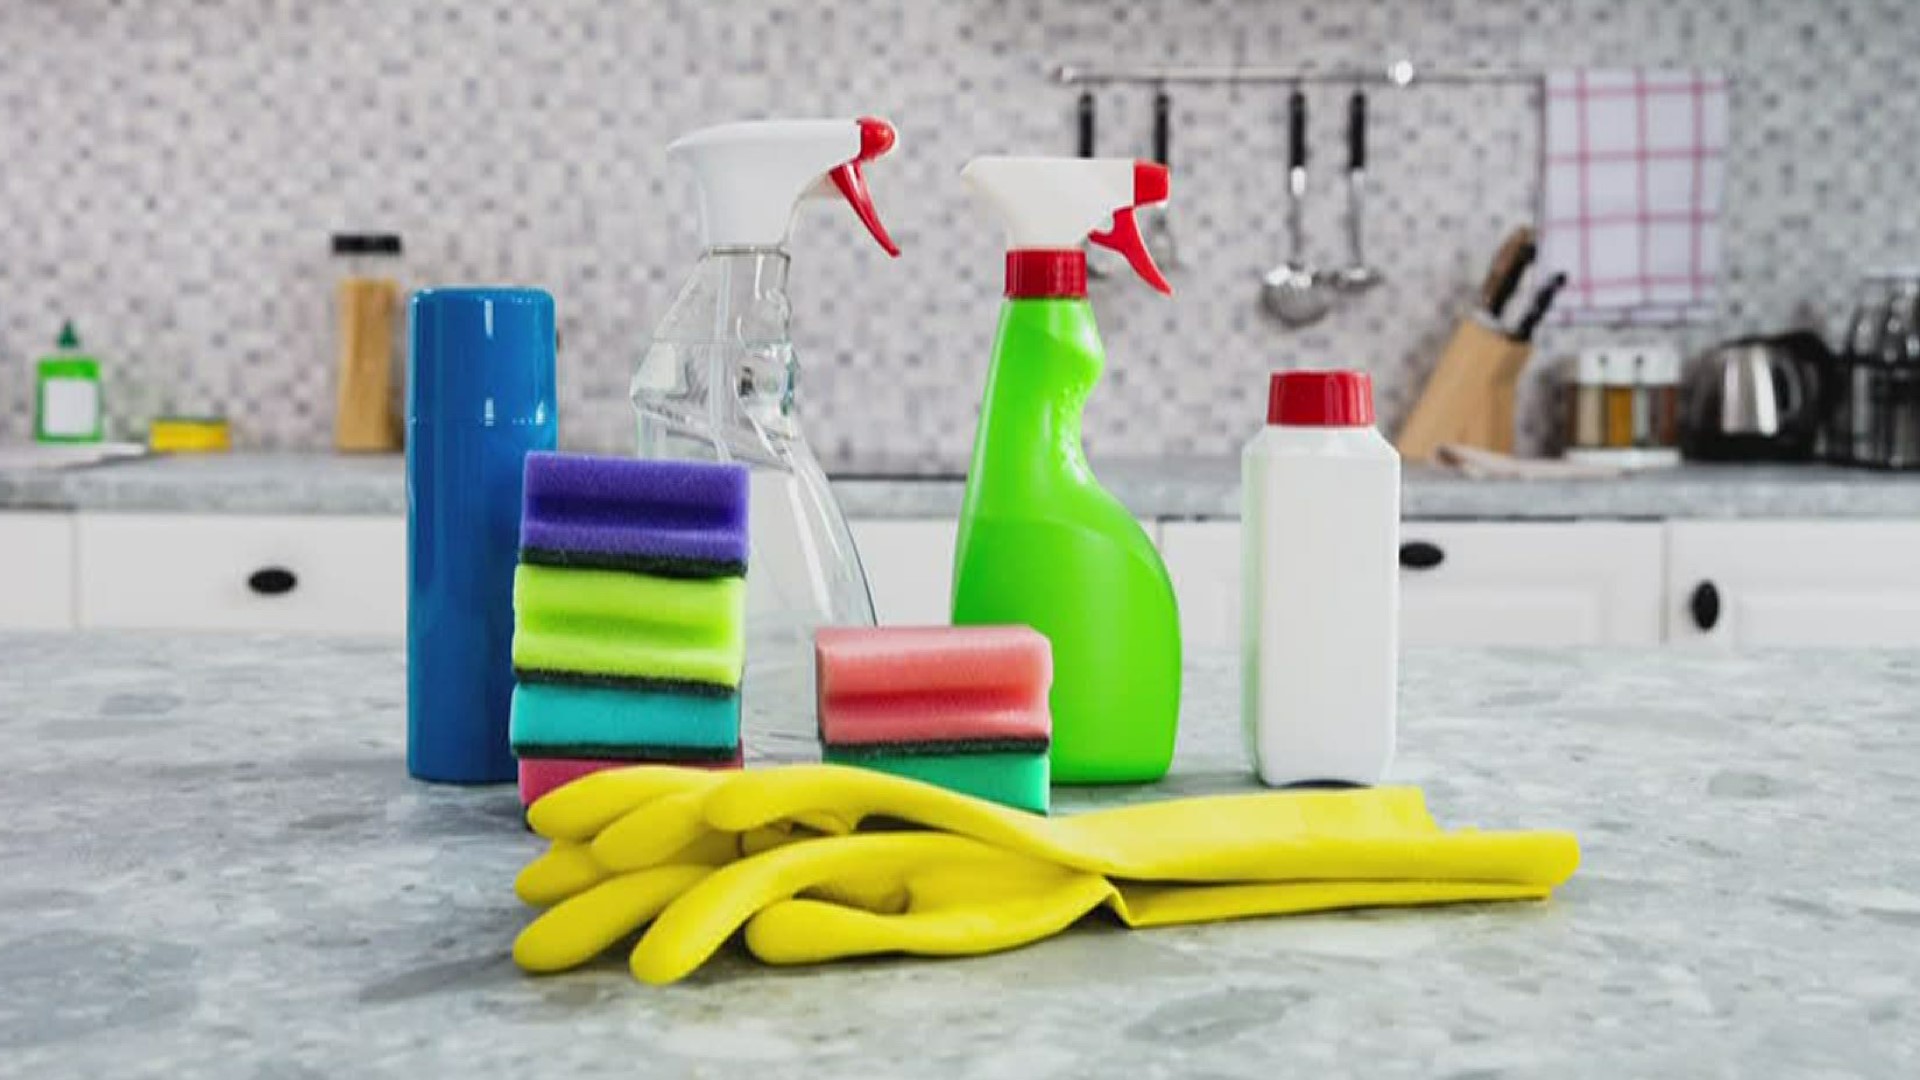 American Cleaning Institute's Brian Sansoni shares tips to prevent household poisonings. If a poisoning happens call 1-800-222-1222.